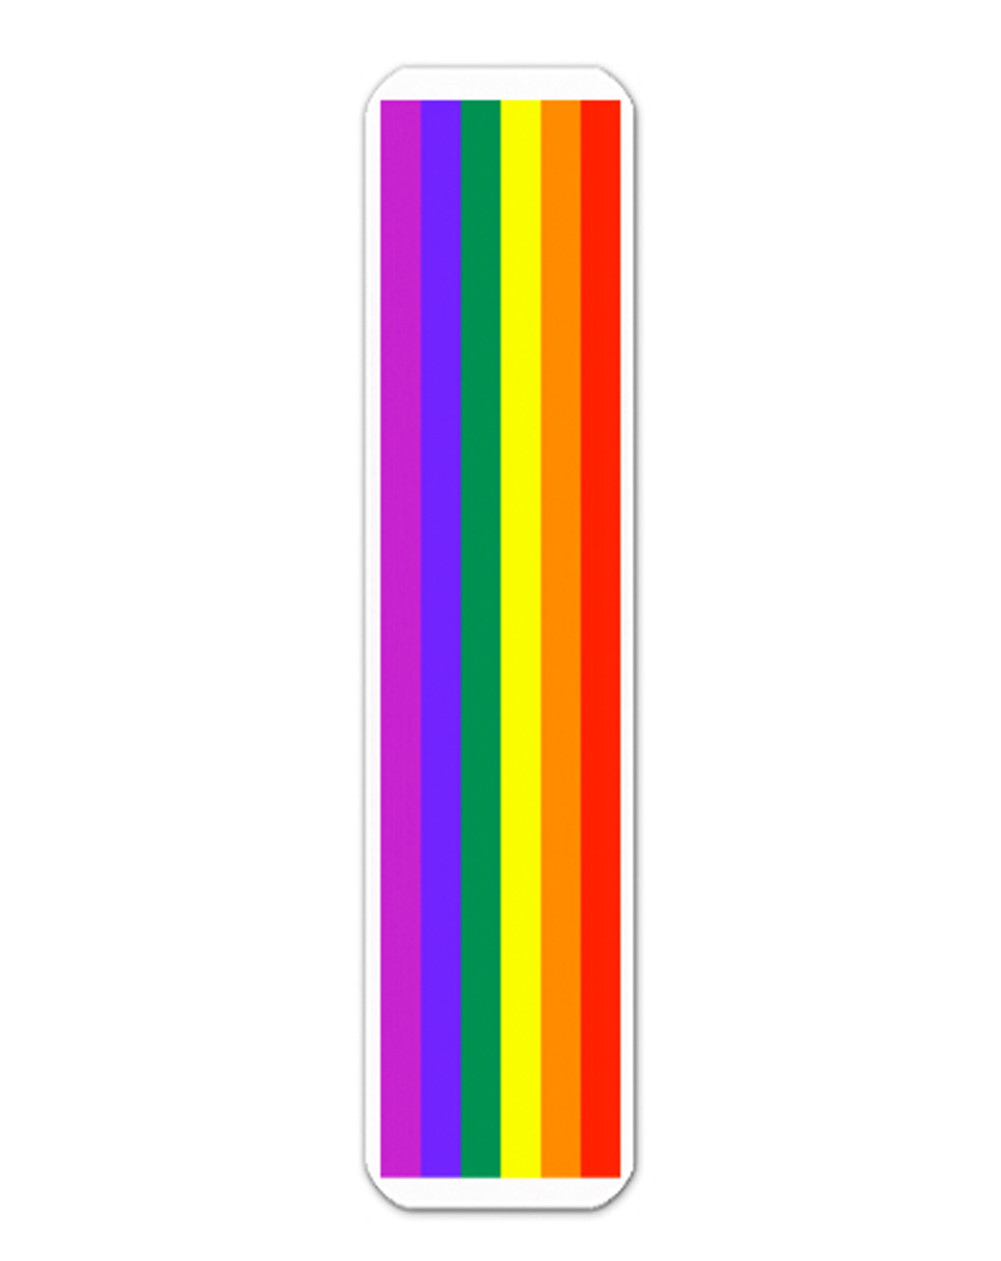 rainbow-pride-flag-laminated-bookmark-lgbt-gay-and-lesbian-pride-gifts-rainbow-items-from